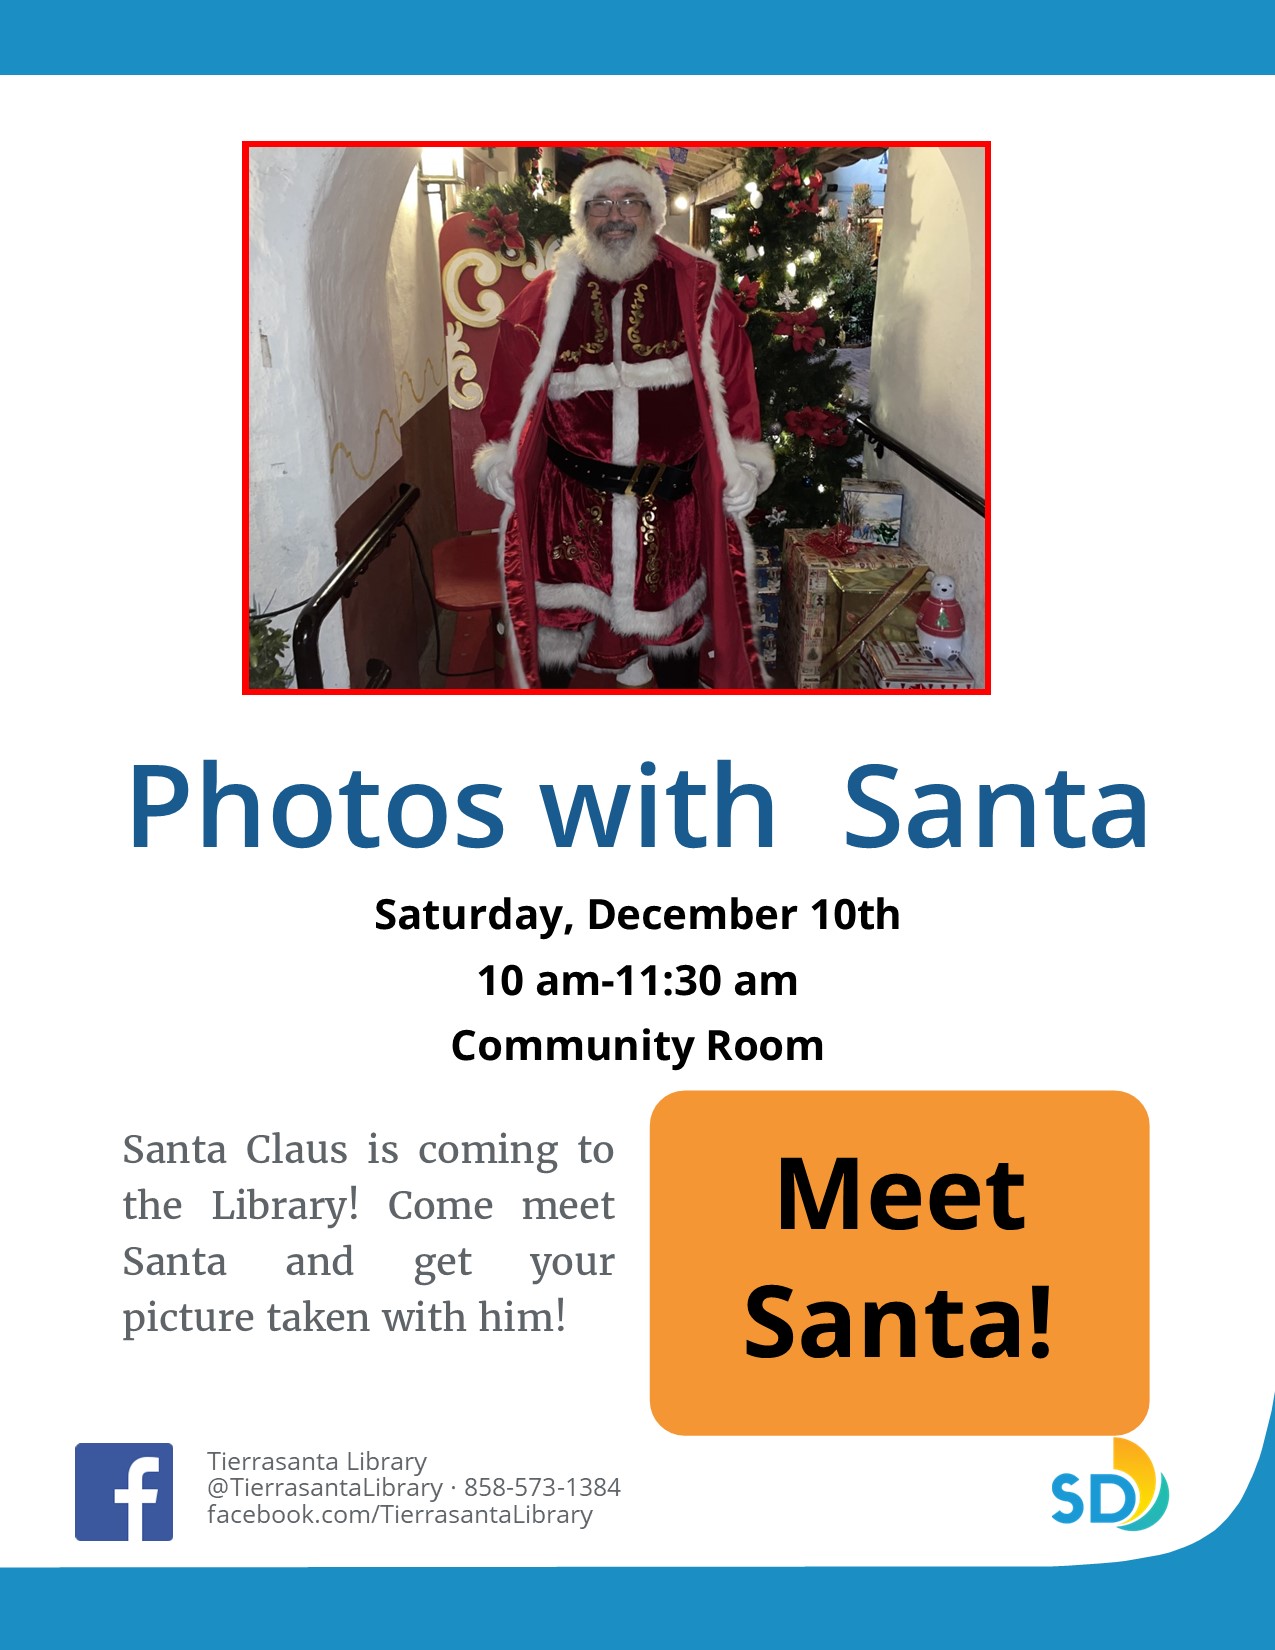 Flyer with a picture of Santa in a Christmas tree setting